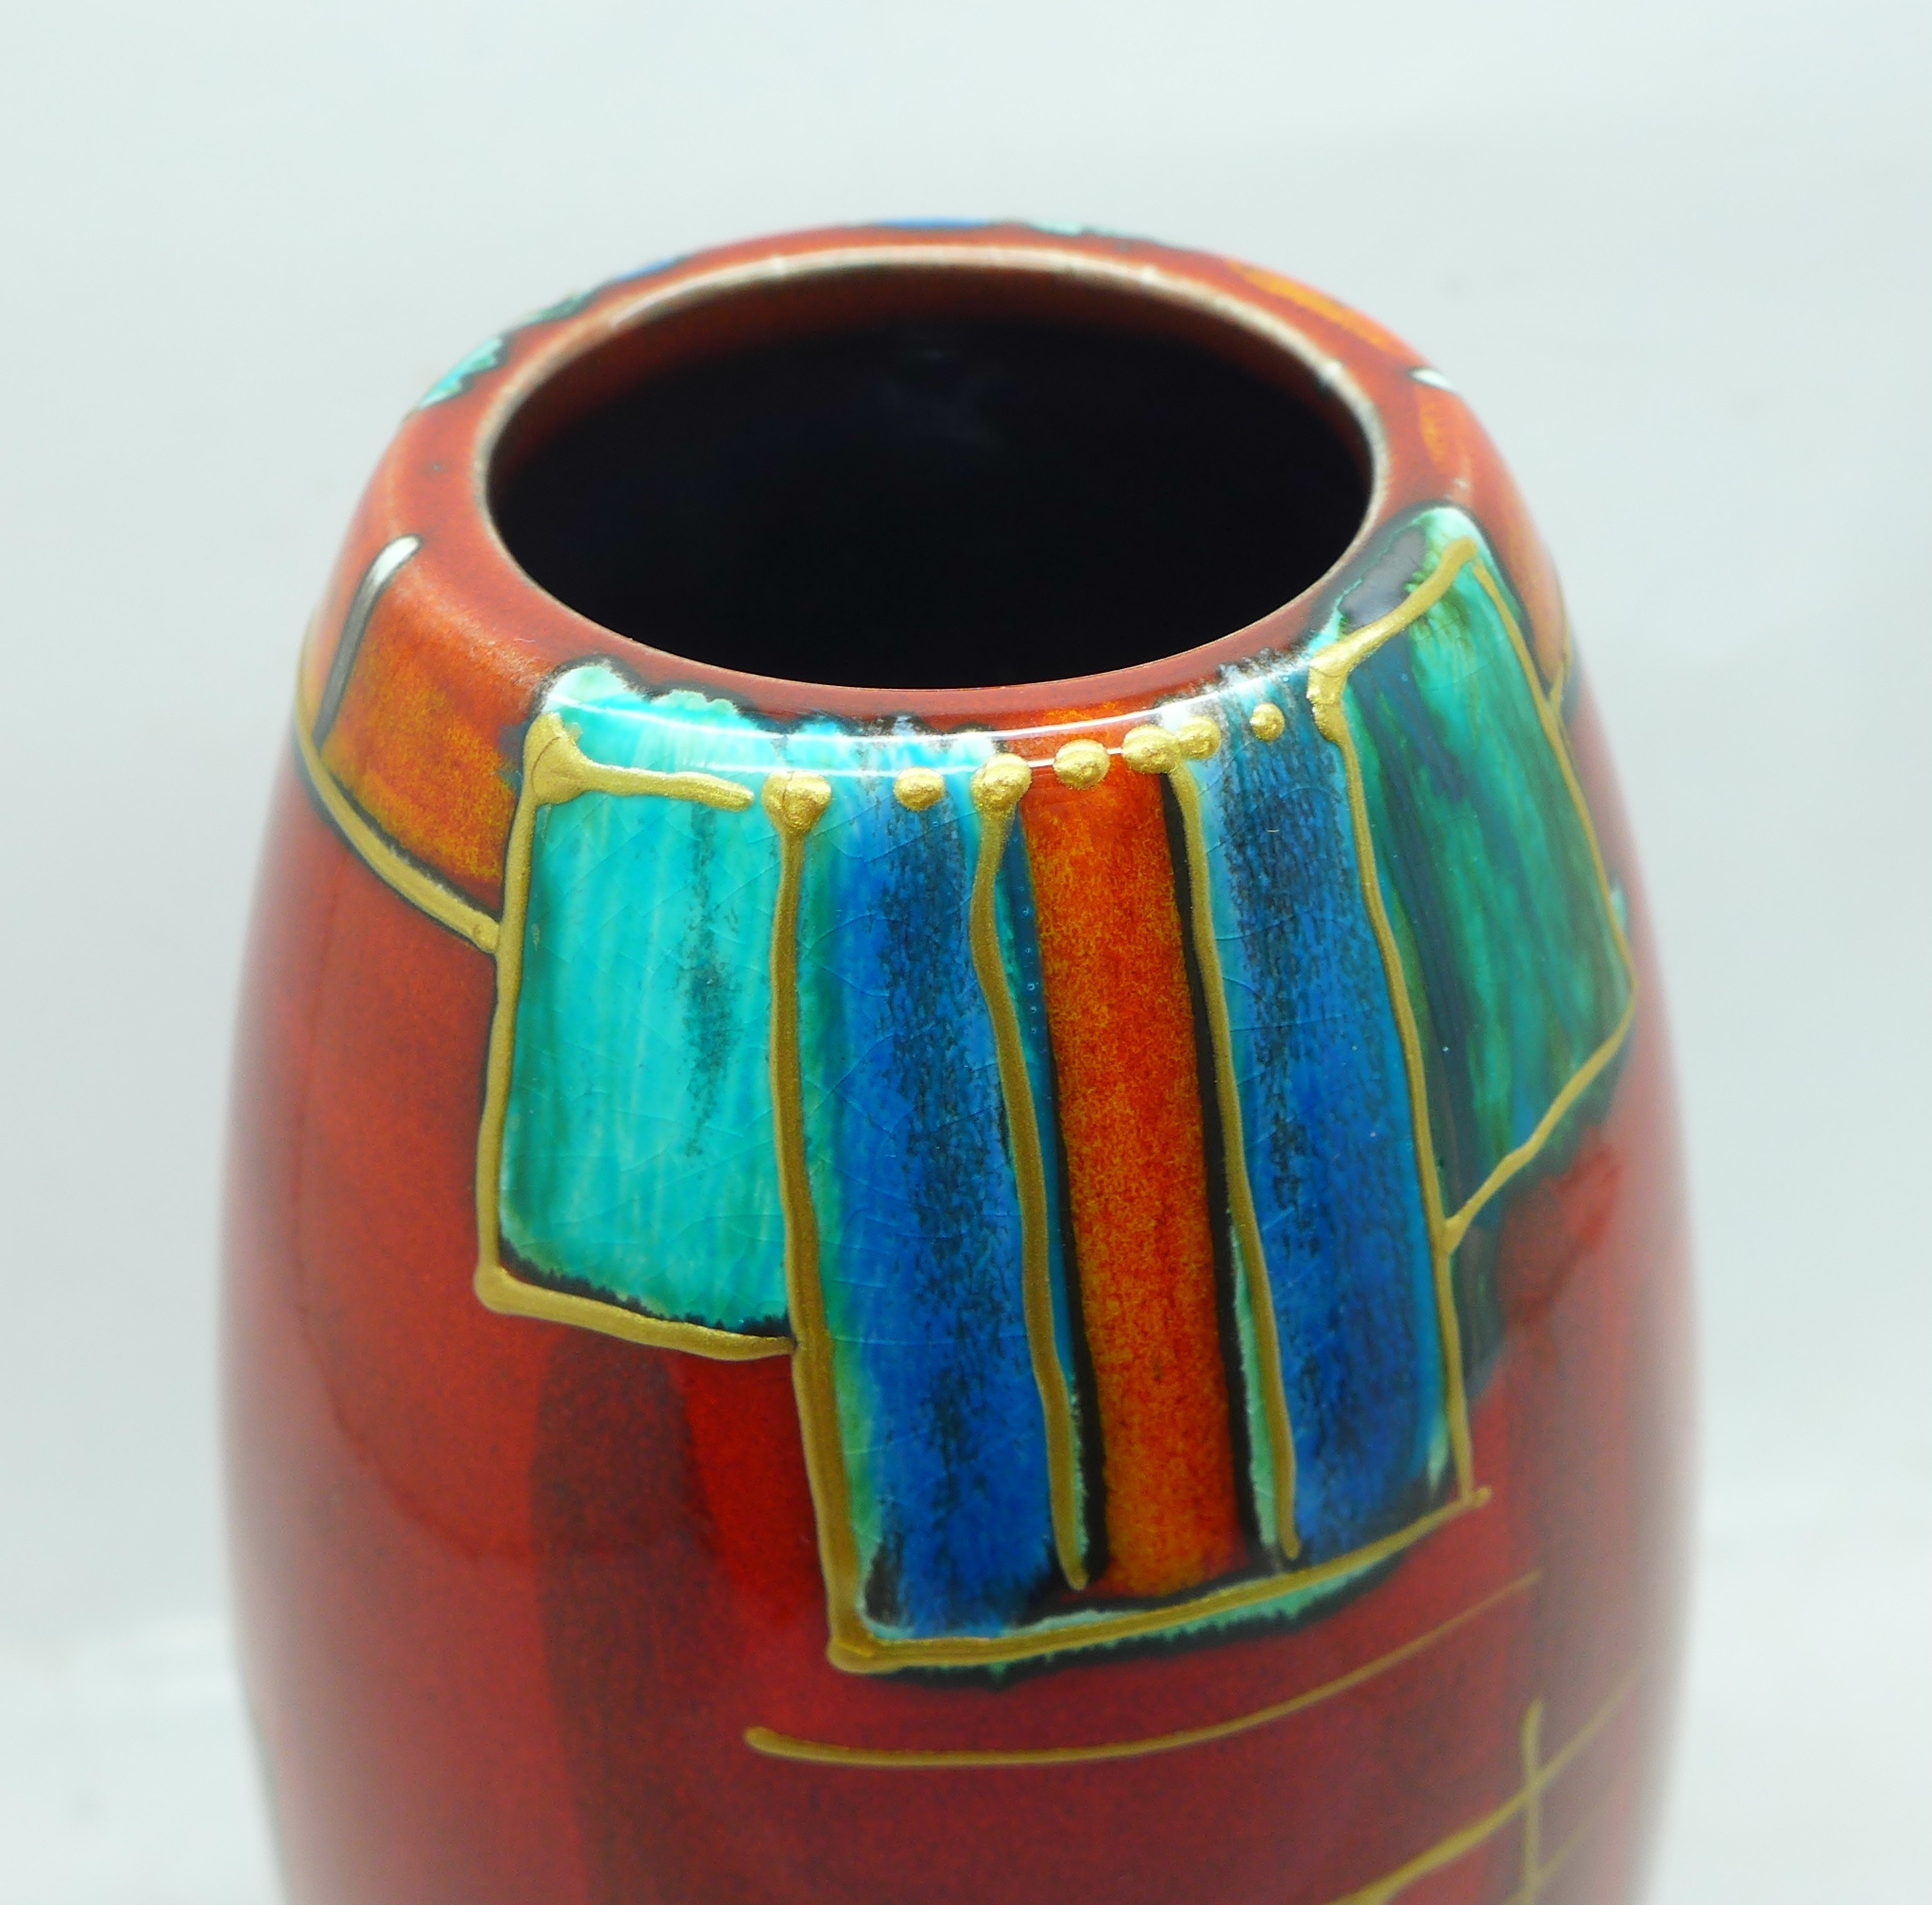 An Anita Harris Skittle vase, Deco design, 18cm, signed in gold on the base - Image 3 of 4